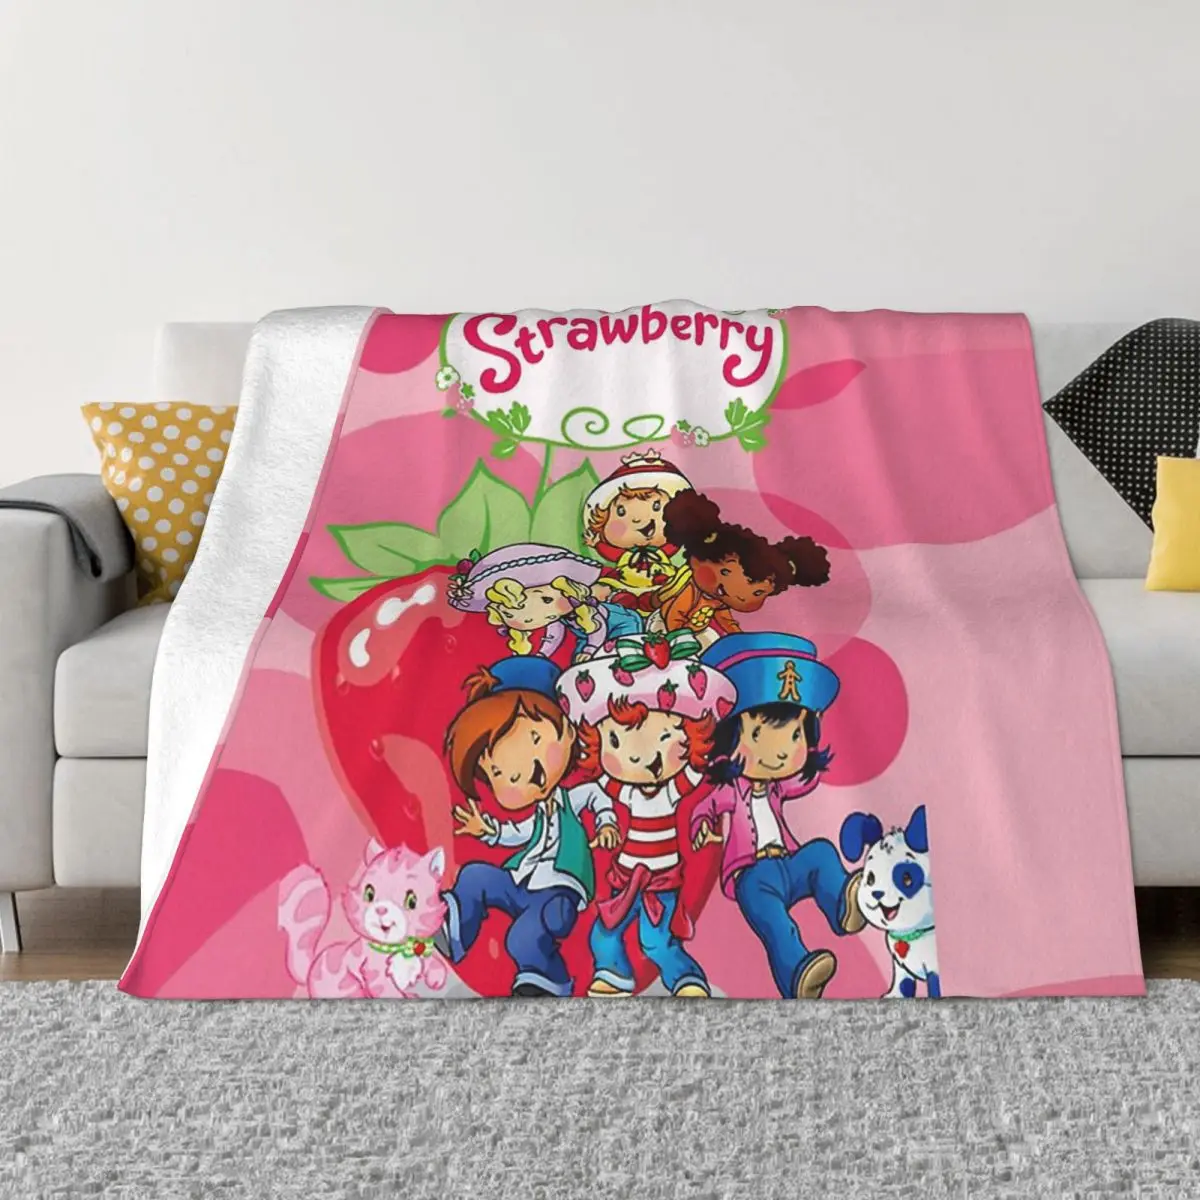 

Strawberry Shortcake Cartoon Blanket Flannel Decoration With Her Friends Portable Home Bedspread